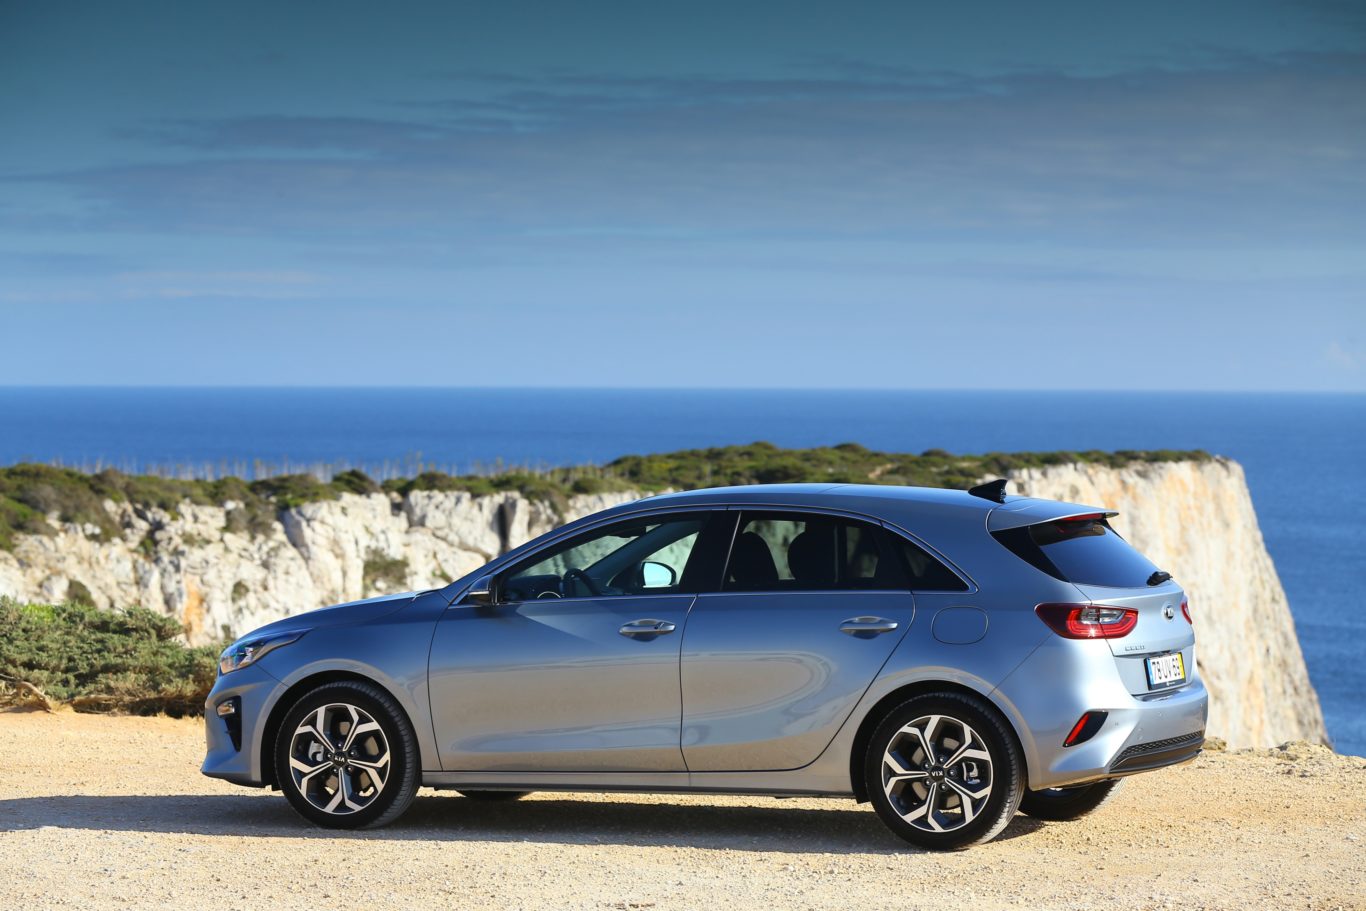 The Ceed is one of the most popular cars in Kia's range